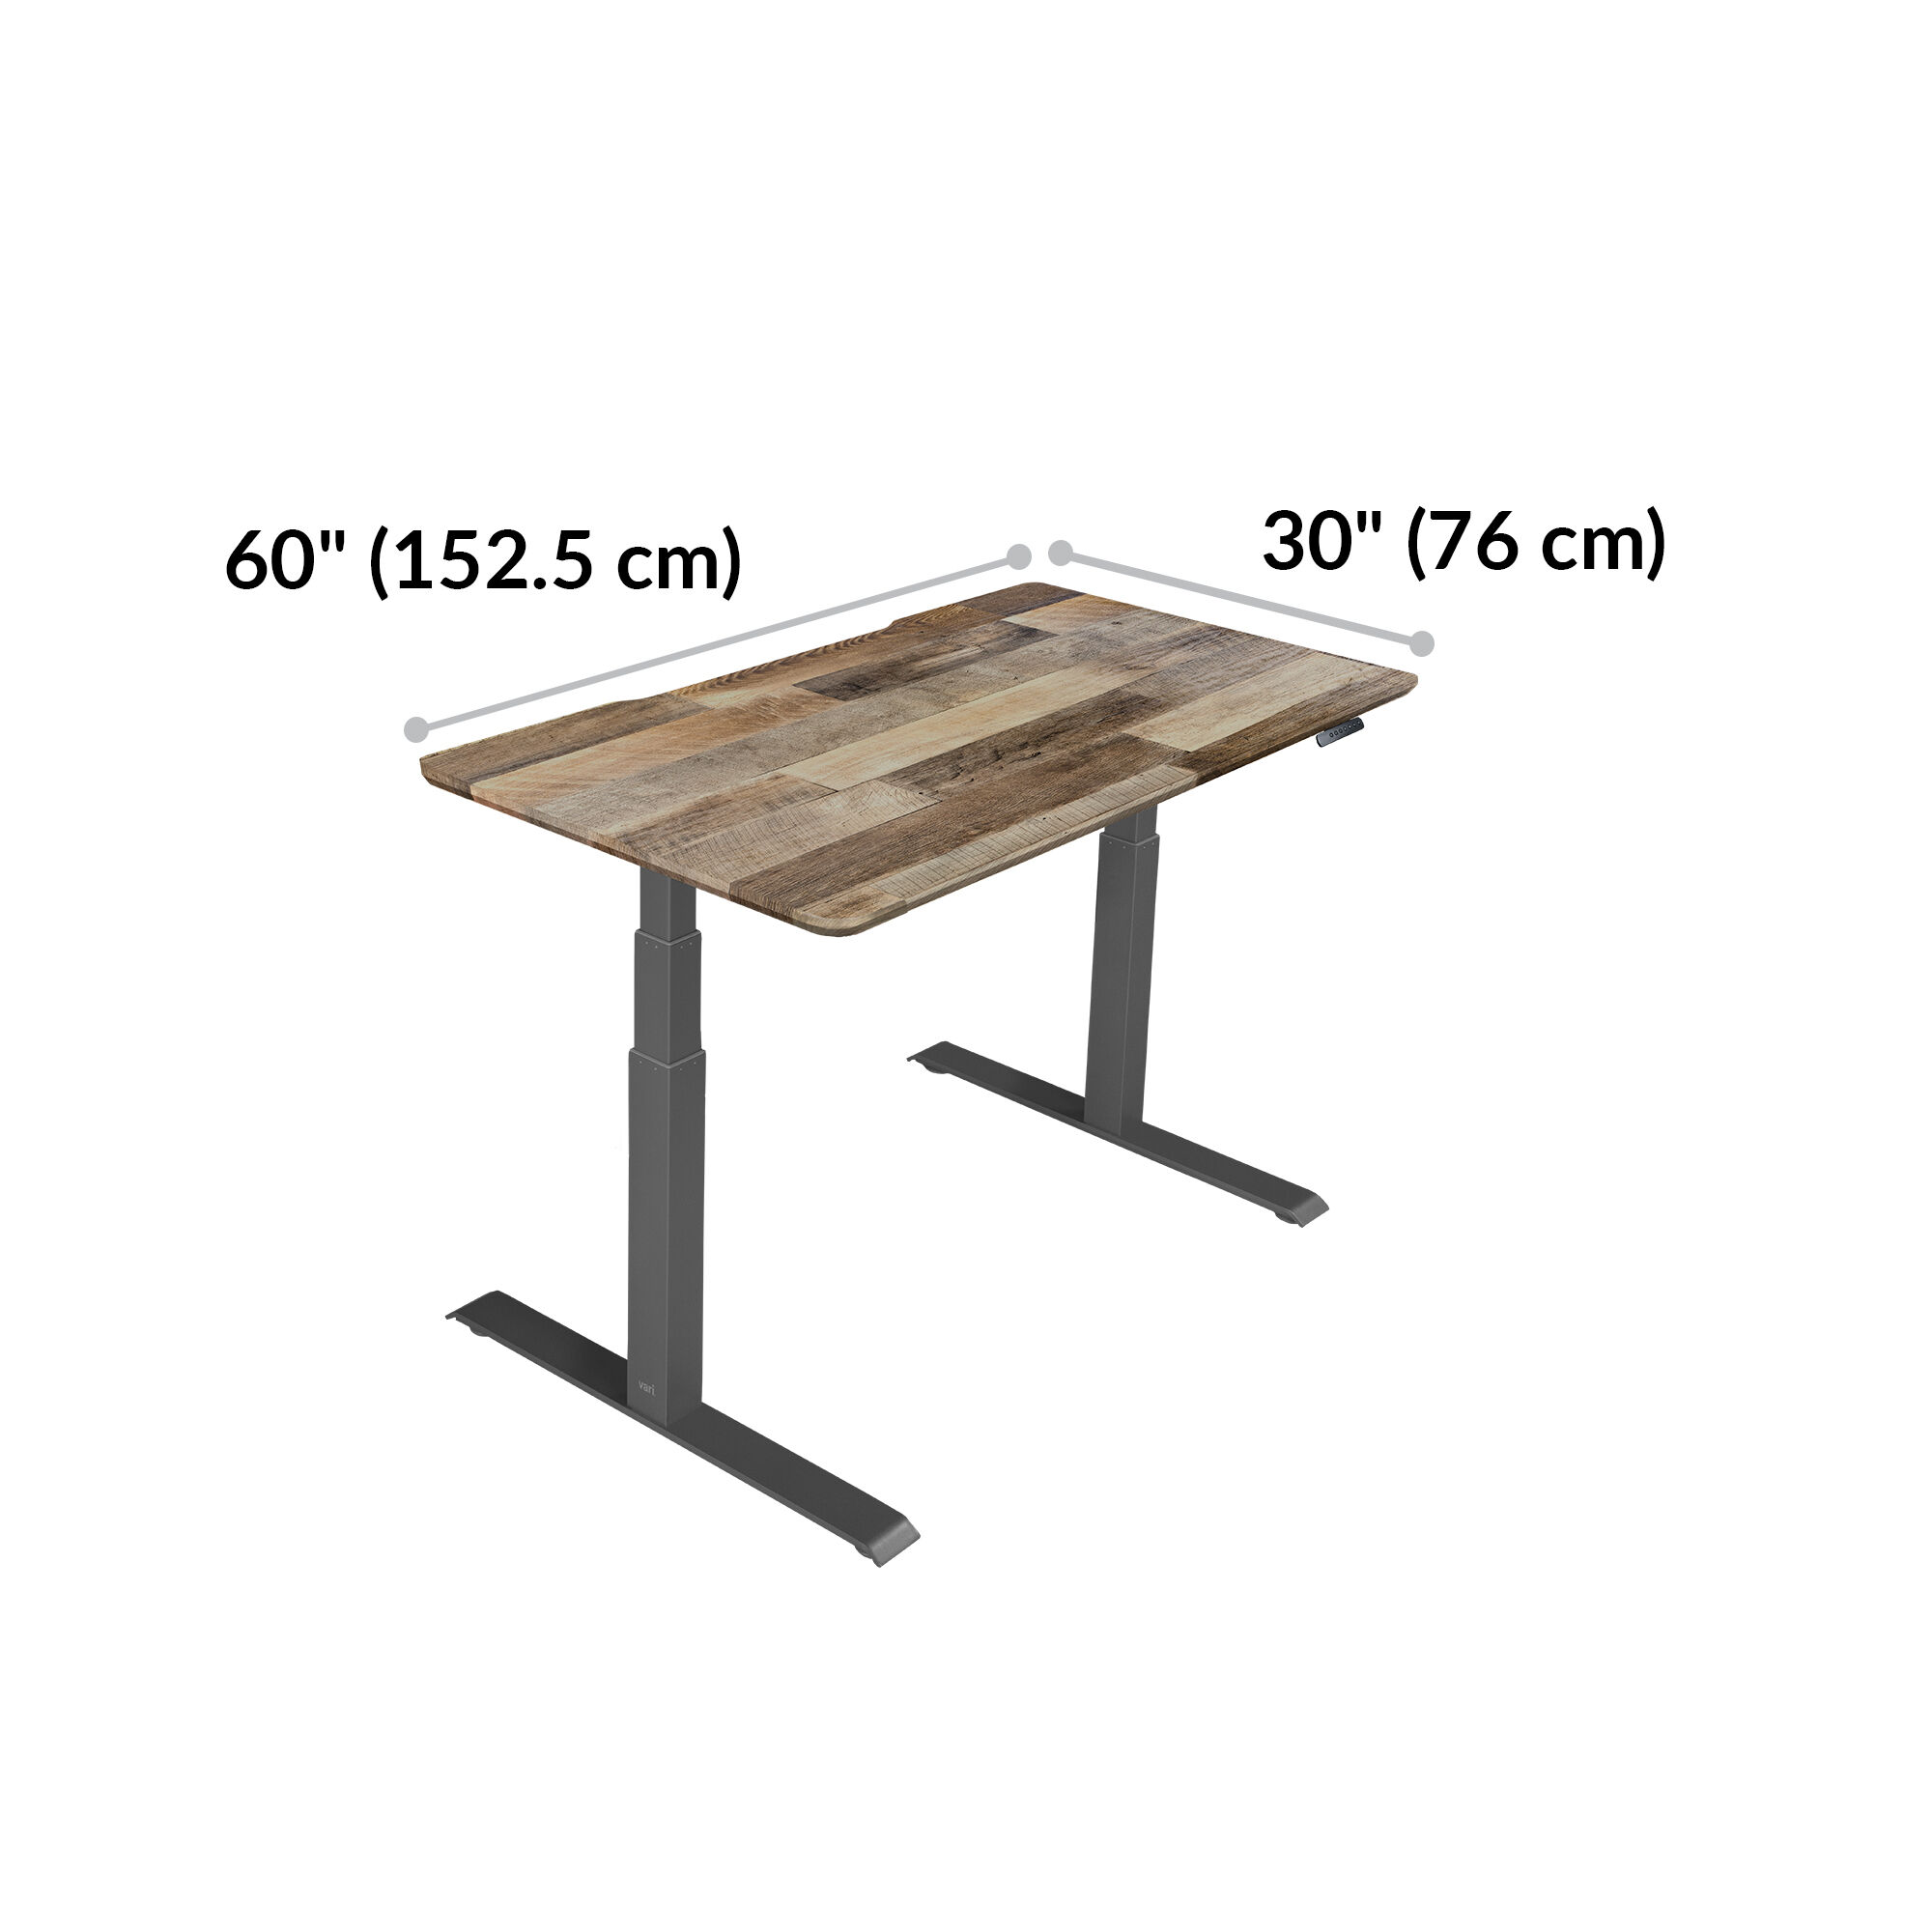 Butcher Block Dual Motor Sit to Stand Desk Solid Top with Height Adjustable Steel Legs Push Button Memory Settings Vari Electric Standing Desk 60 x 30 Work or Home Office Desk -